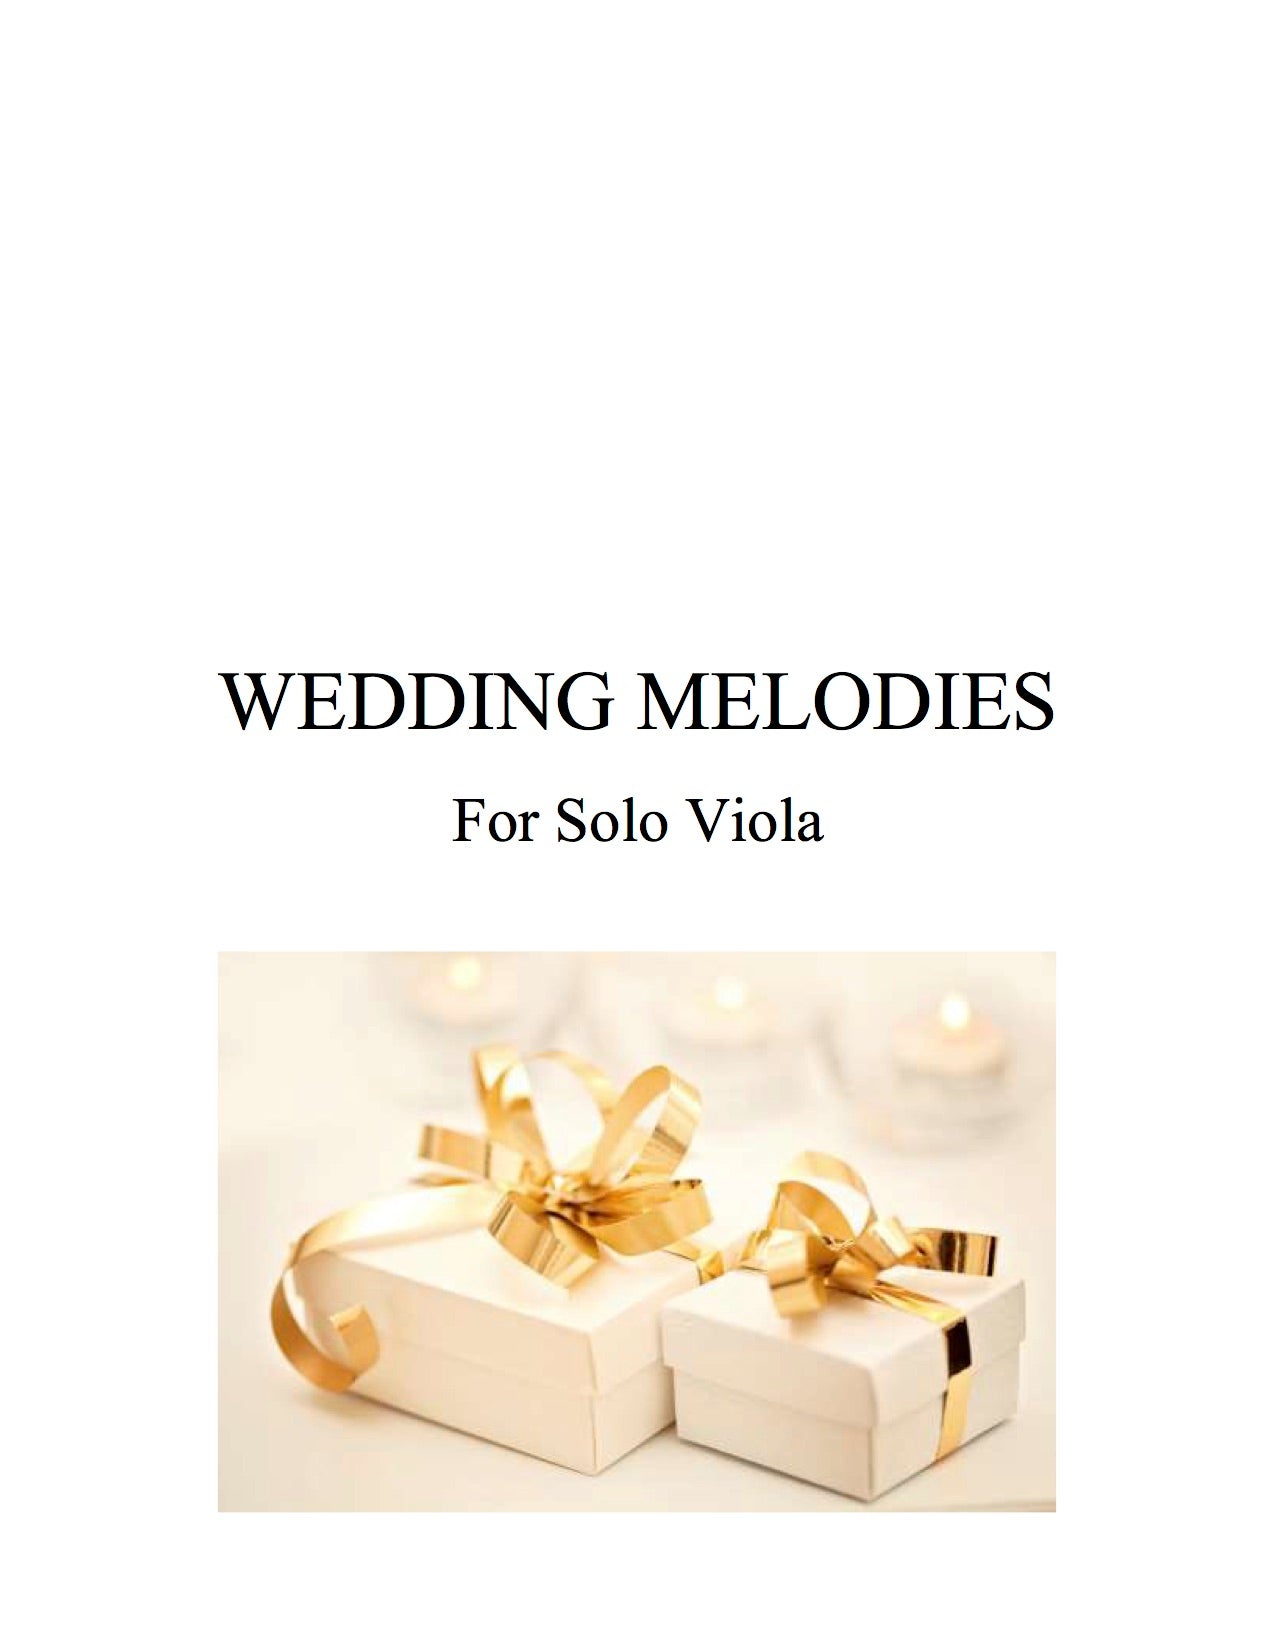 056 - Wedding Melodies for Solo Viola - Double Stops